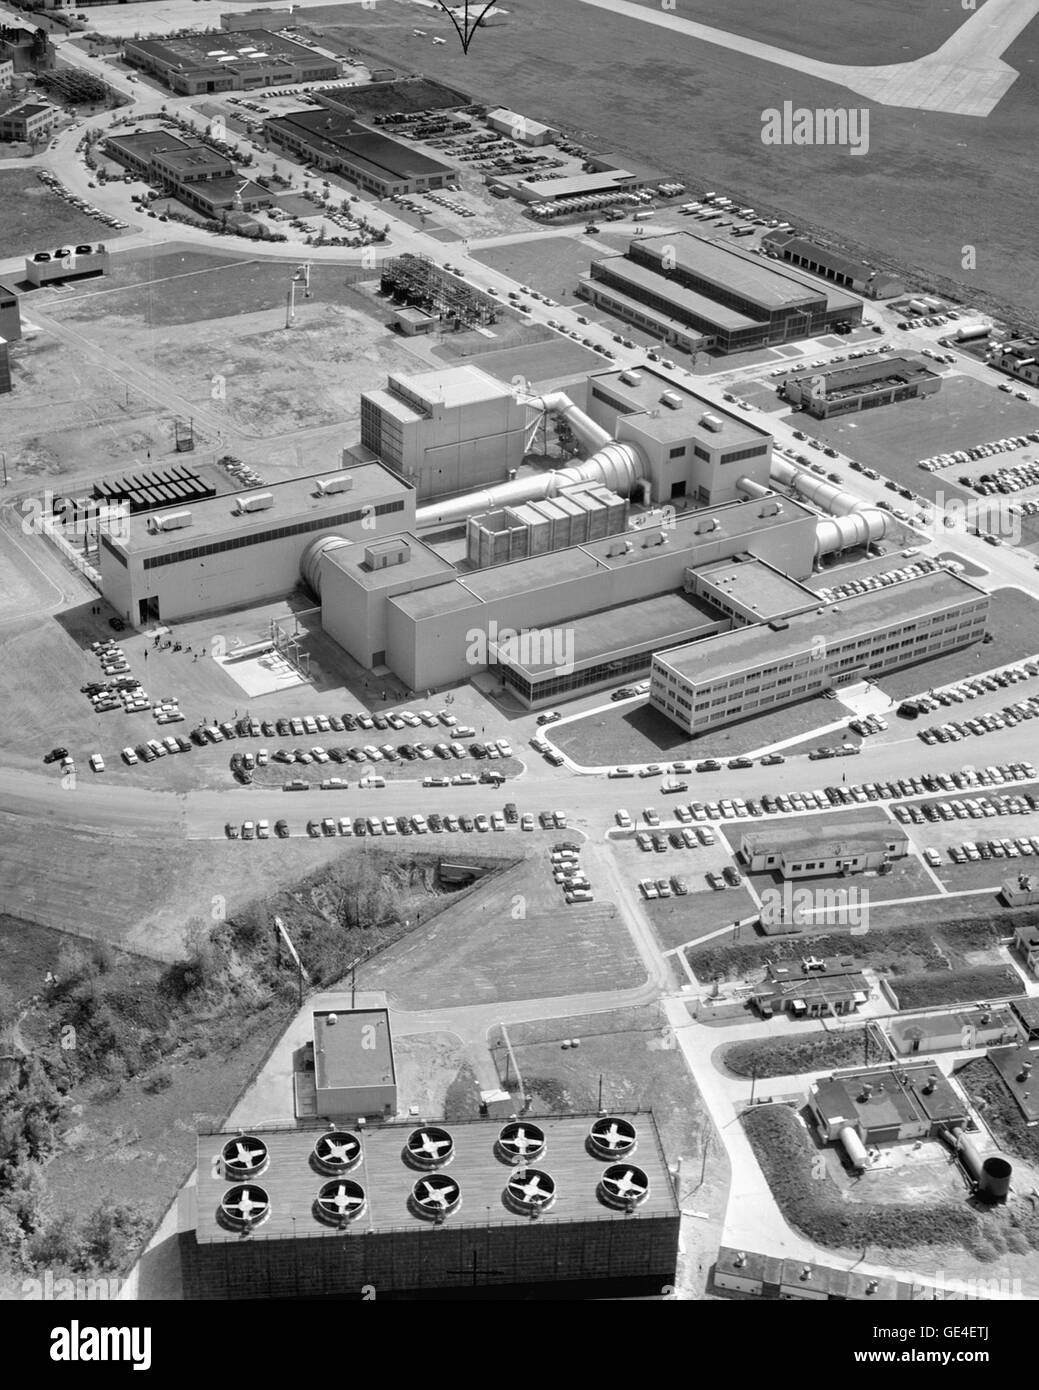 The National Advisory Committee for Aeronautics (NACA) Lewis Research Center 10ft x 10ft Unitary Supersonic Wind Tunnel is shown in the center of this picture. The Unitary Wind Tunnel Plan Act of Congress, a post-war act, stipulated that NACA wind tunnels were to be made available to industry for testing. This push was to encourage the improvement of existing aircraft engines. This aerial view shows the size of the facility. The Lewis Research Center is now known as the John H. Glenn Research Center.  Image # : C1956-42303 Date: March 23, 1956 Stock Photo